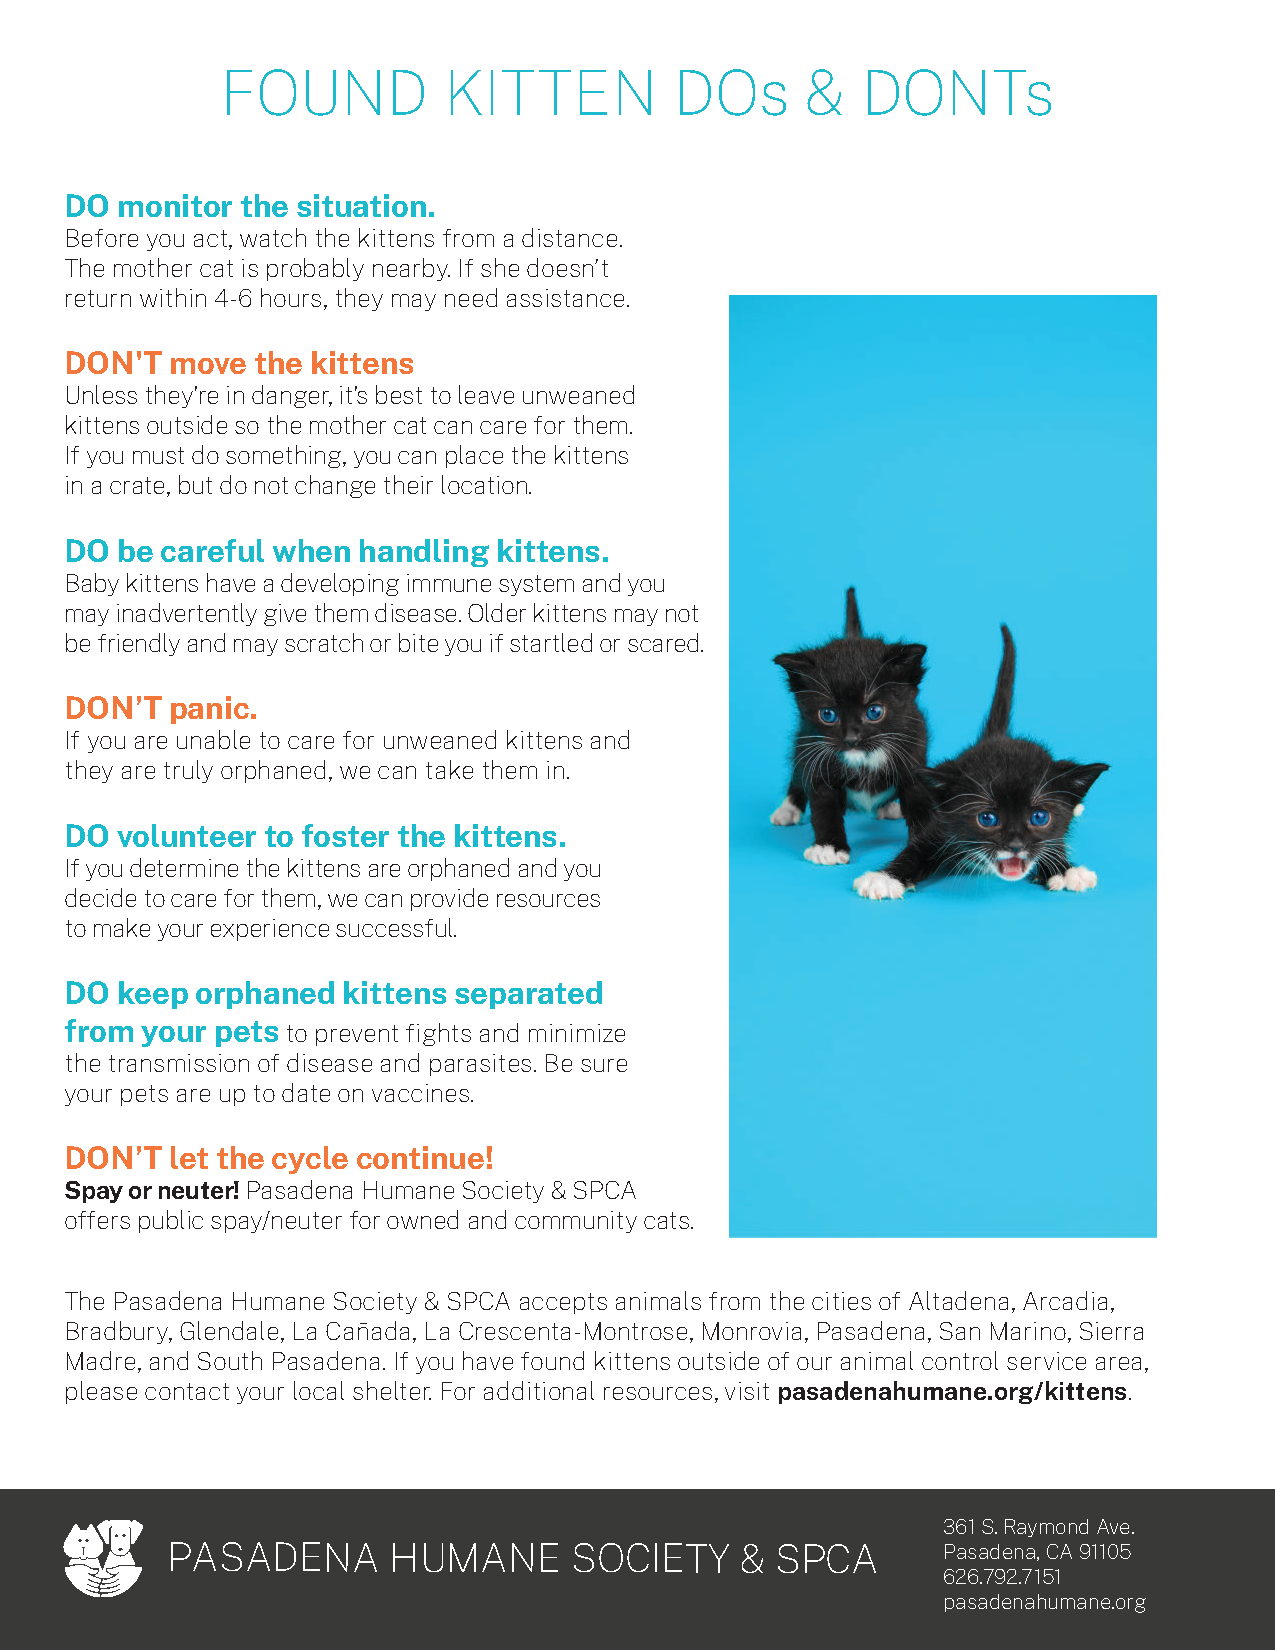 Found Kitten Dos and Don'ts